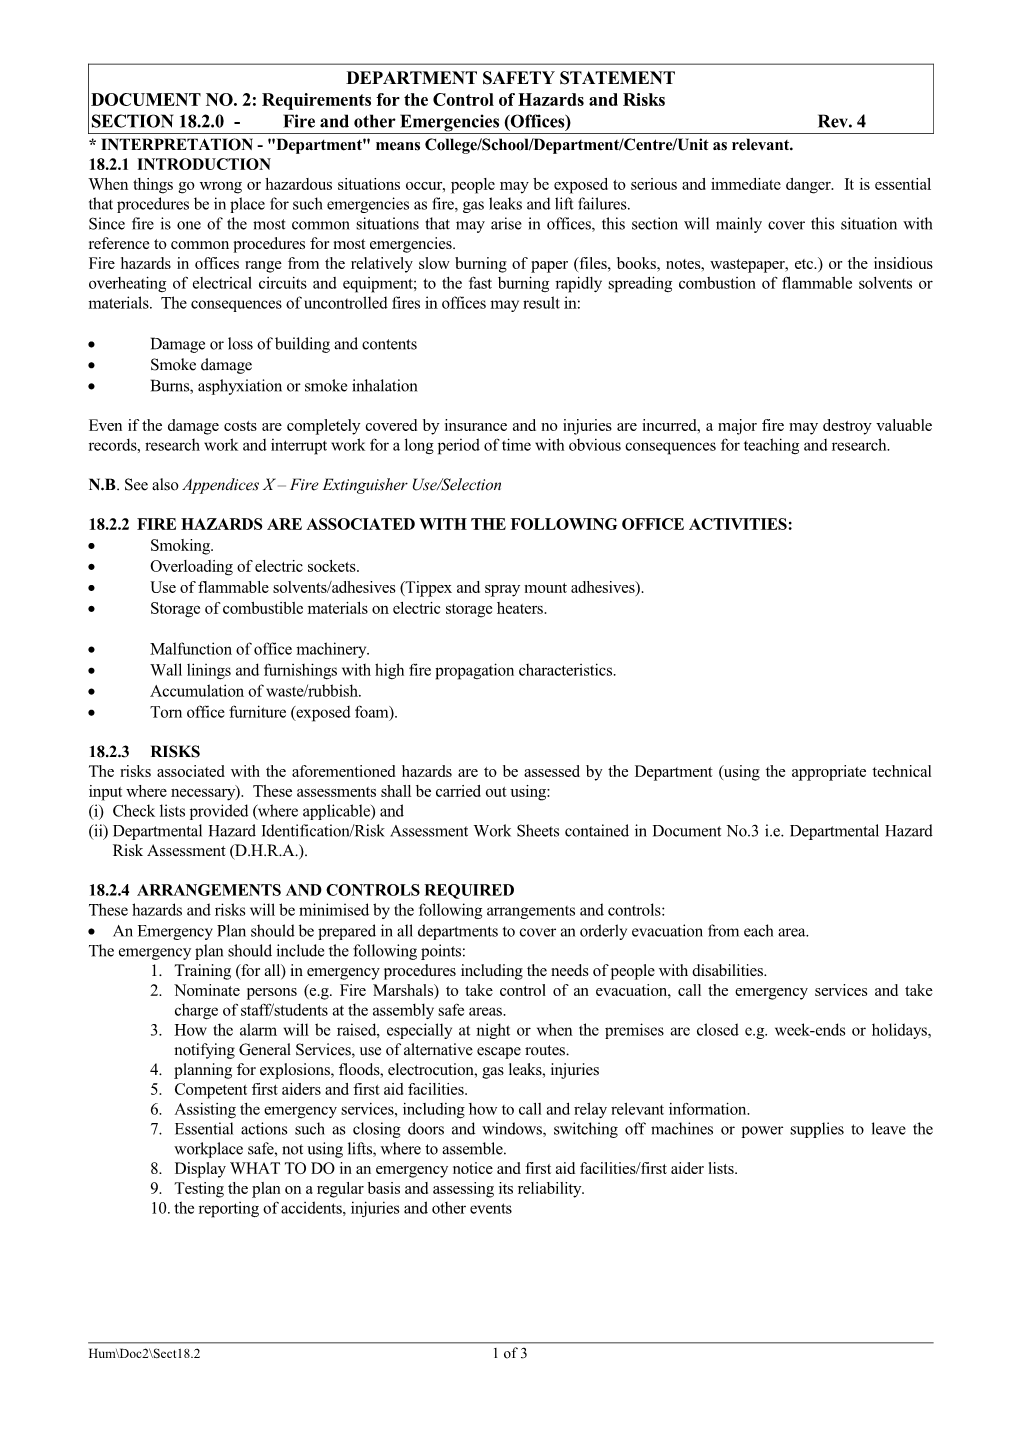 DOCUMENT NO. 2: Requirements for the Control of Hazards and Risks